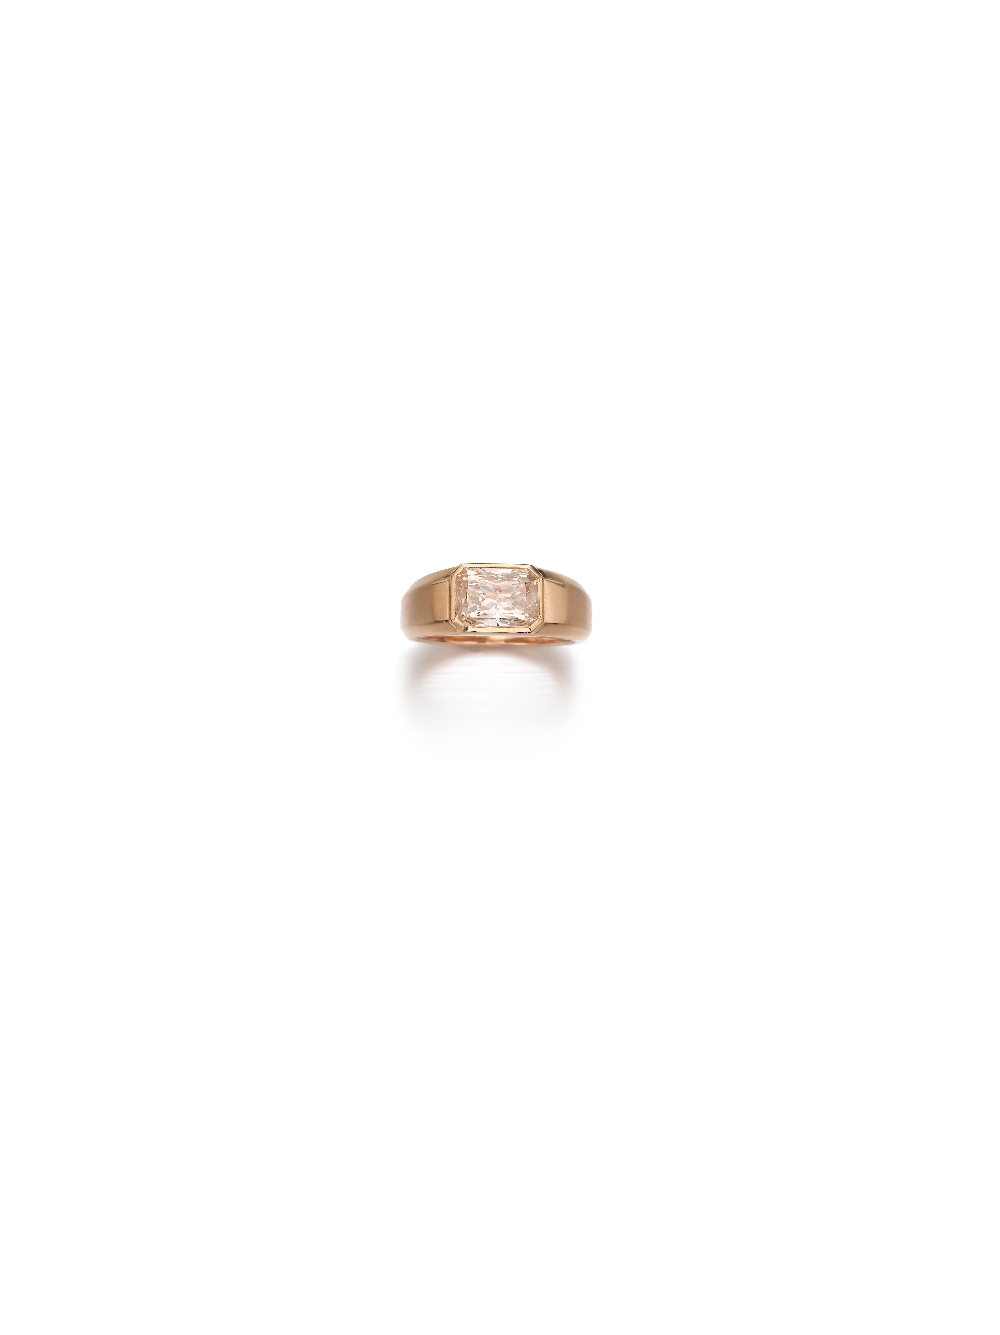 A Radiant Diamond Ring Designed as a band, set with a brownish radiant-cut diamond, weighing